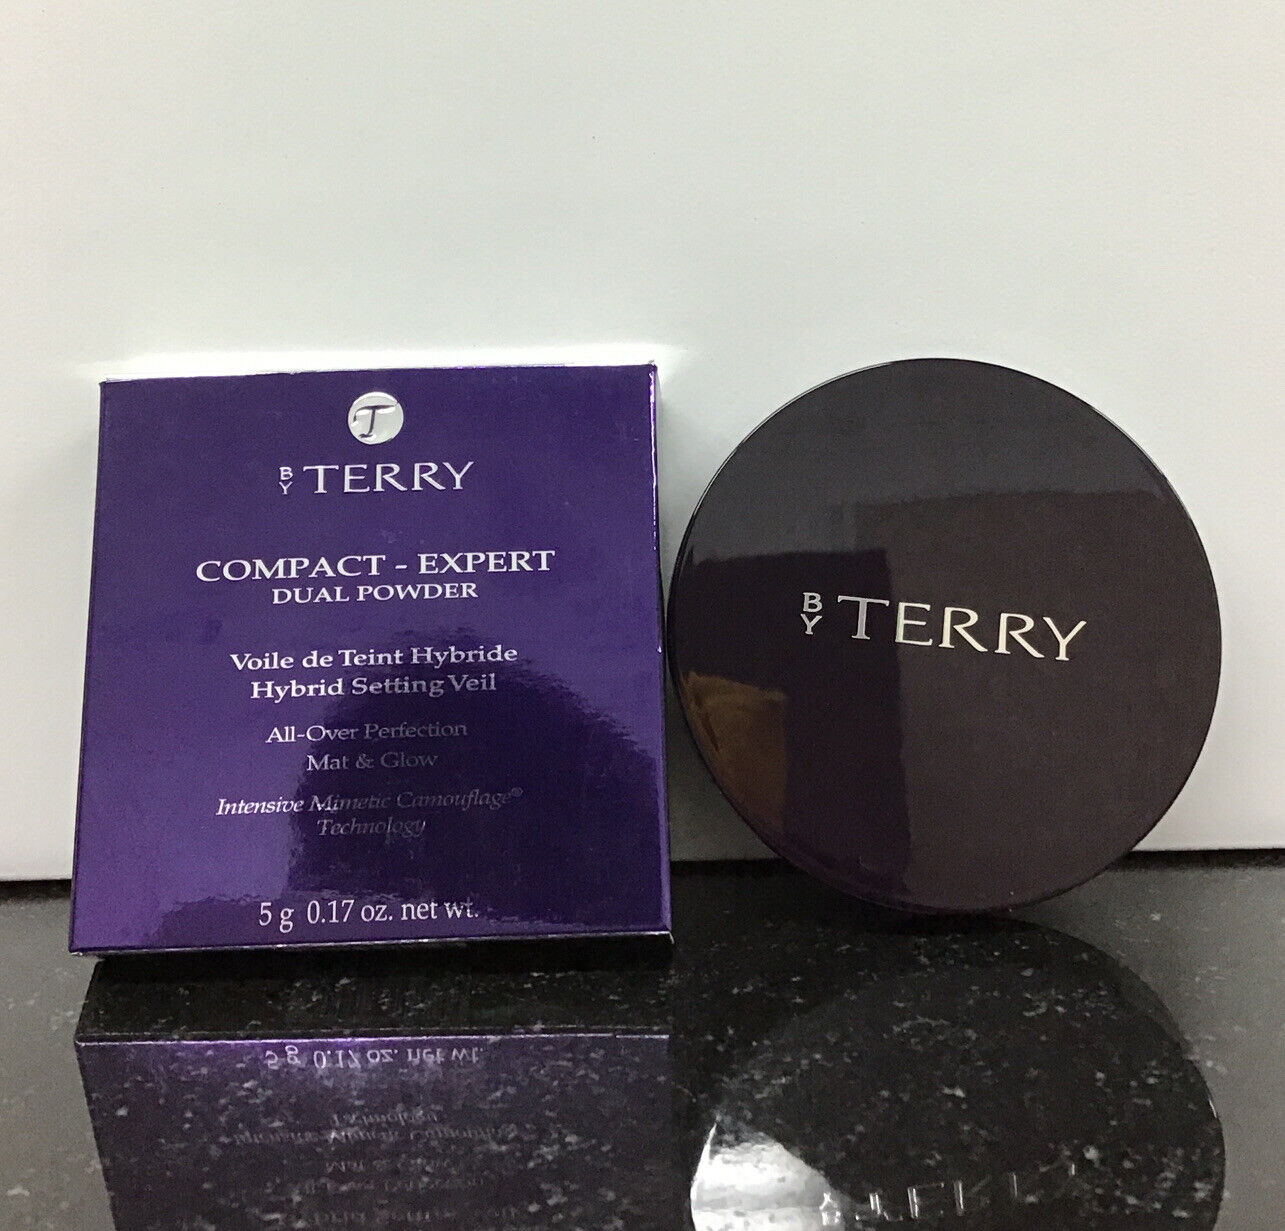 By Terry compact-expert dual powder mat & glow 1 IVORY FAIR 0.17 oz, As pictured